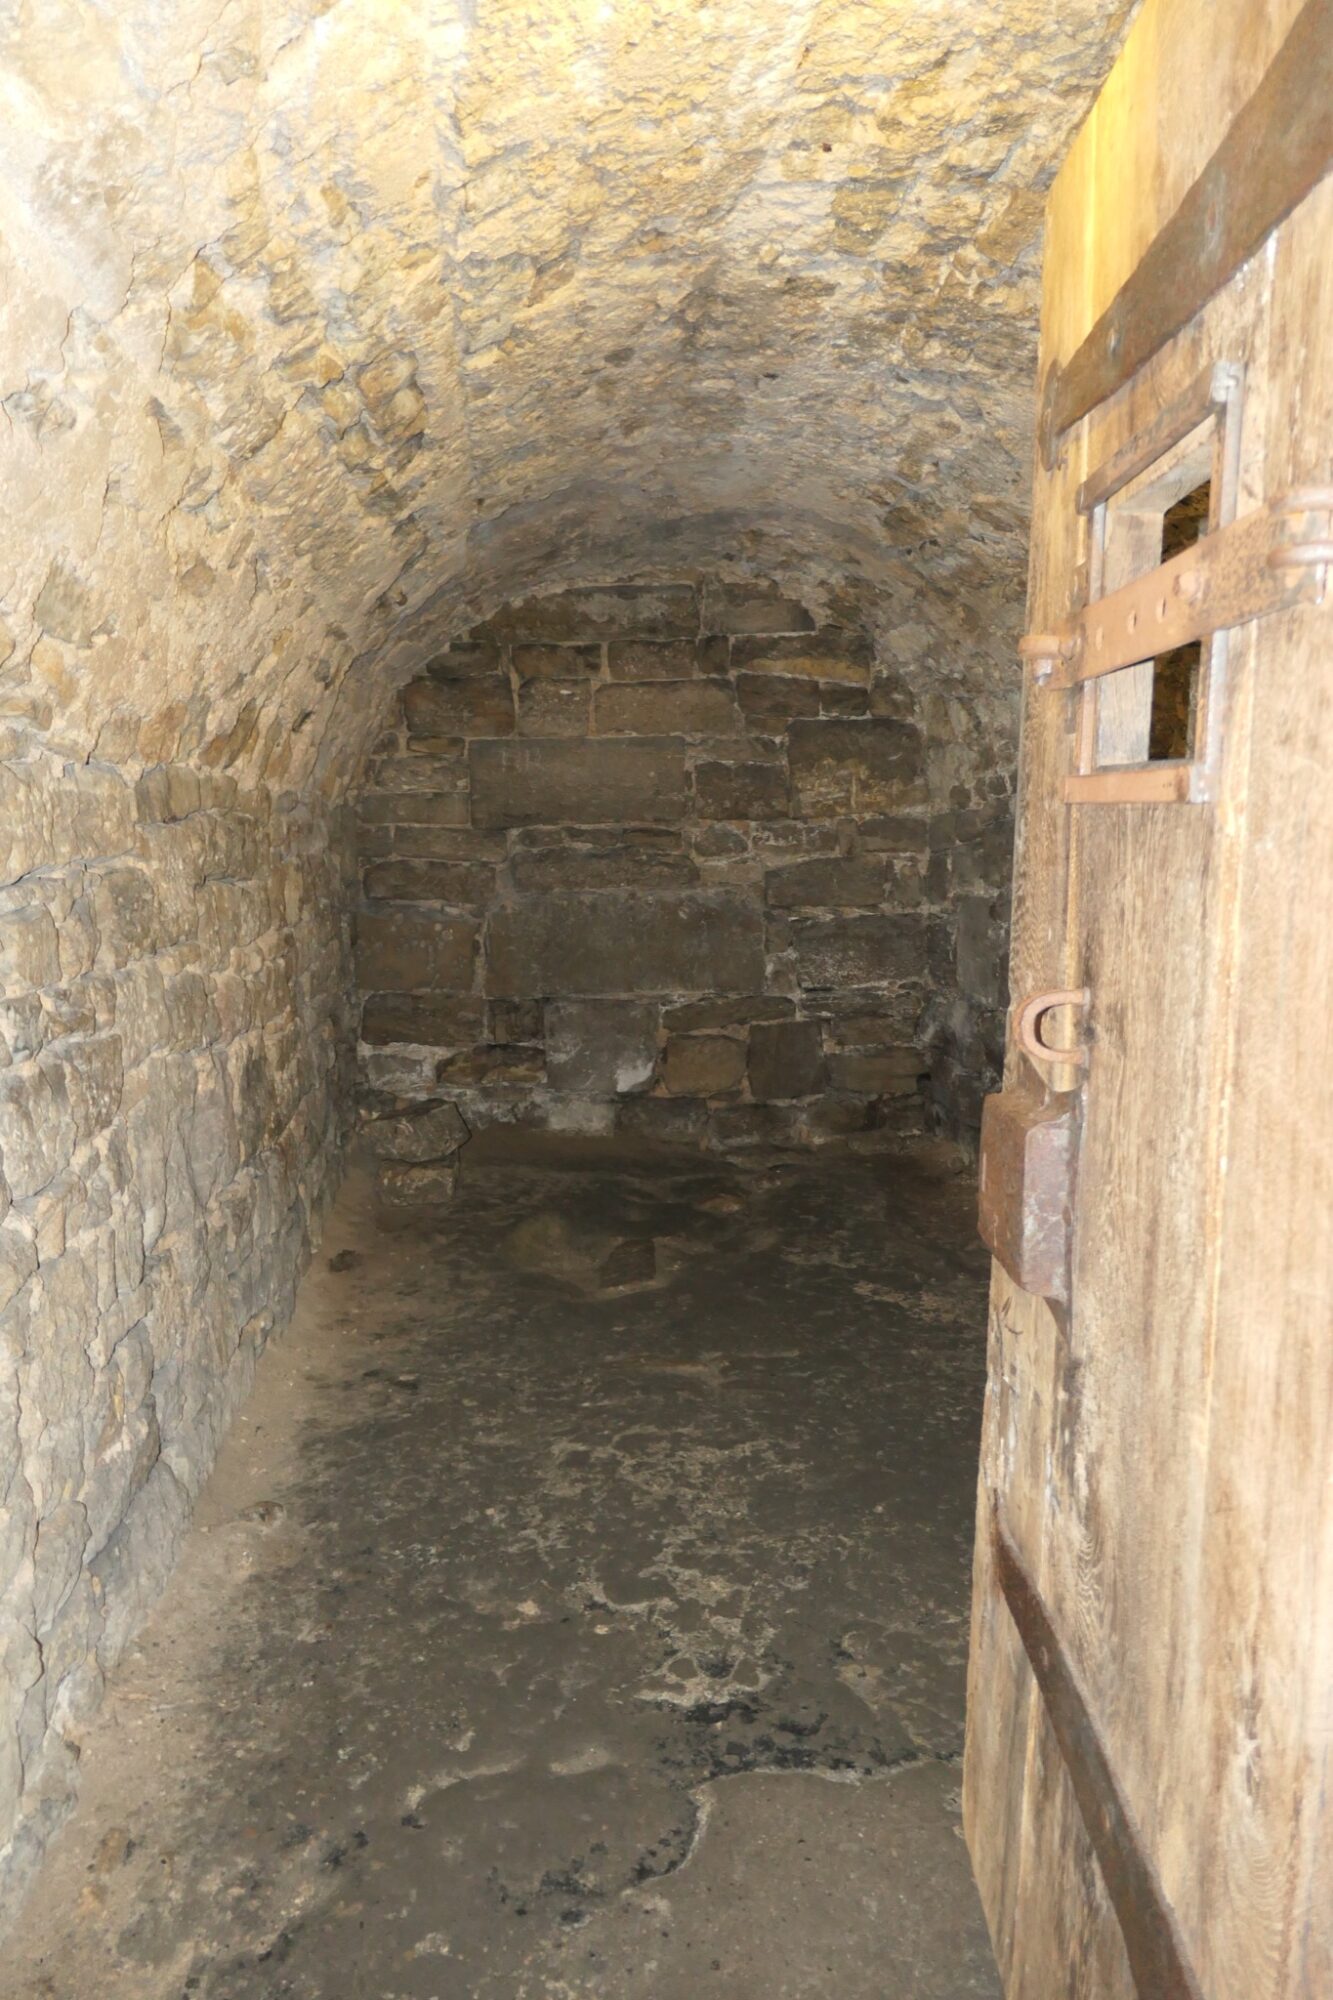 The dungeon cell in which Heinrich Toppler spent his last days.